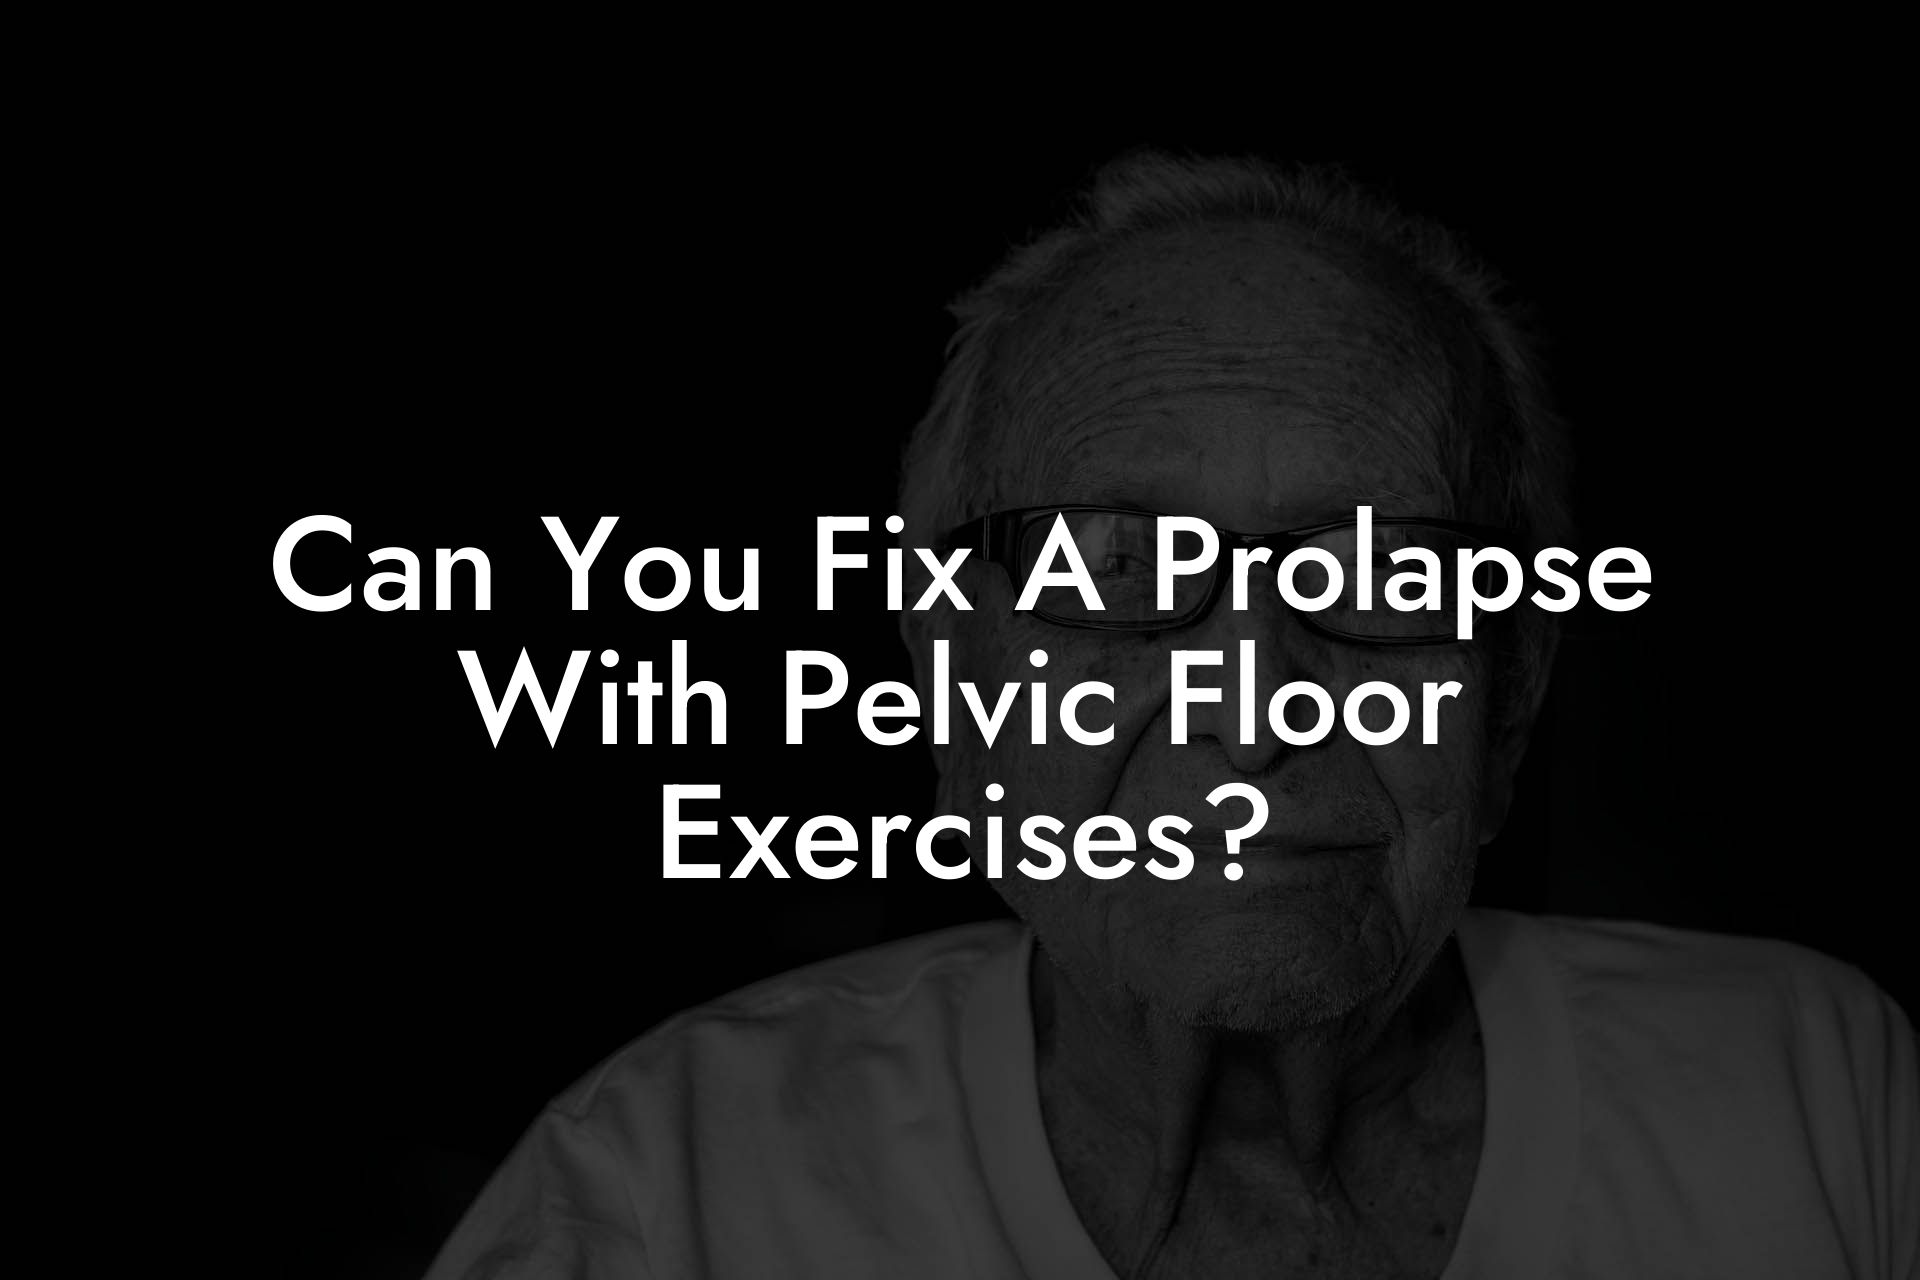 Can You Fix A Prolapse With Pelvic Floor Exercises?